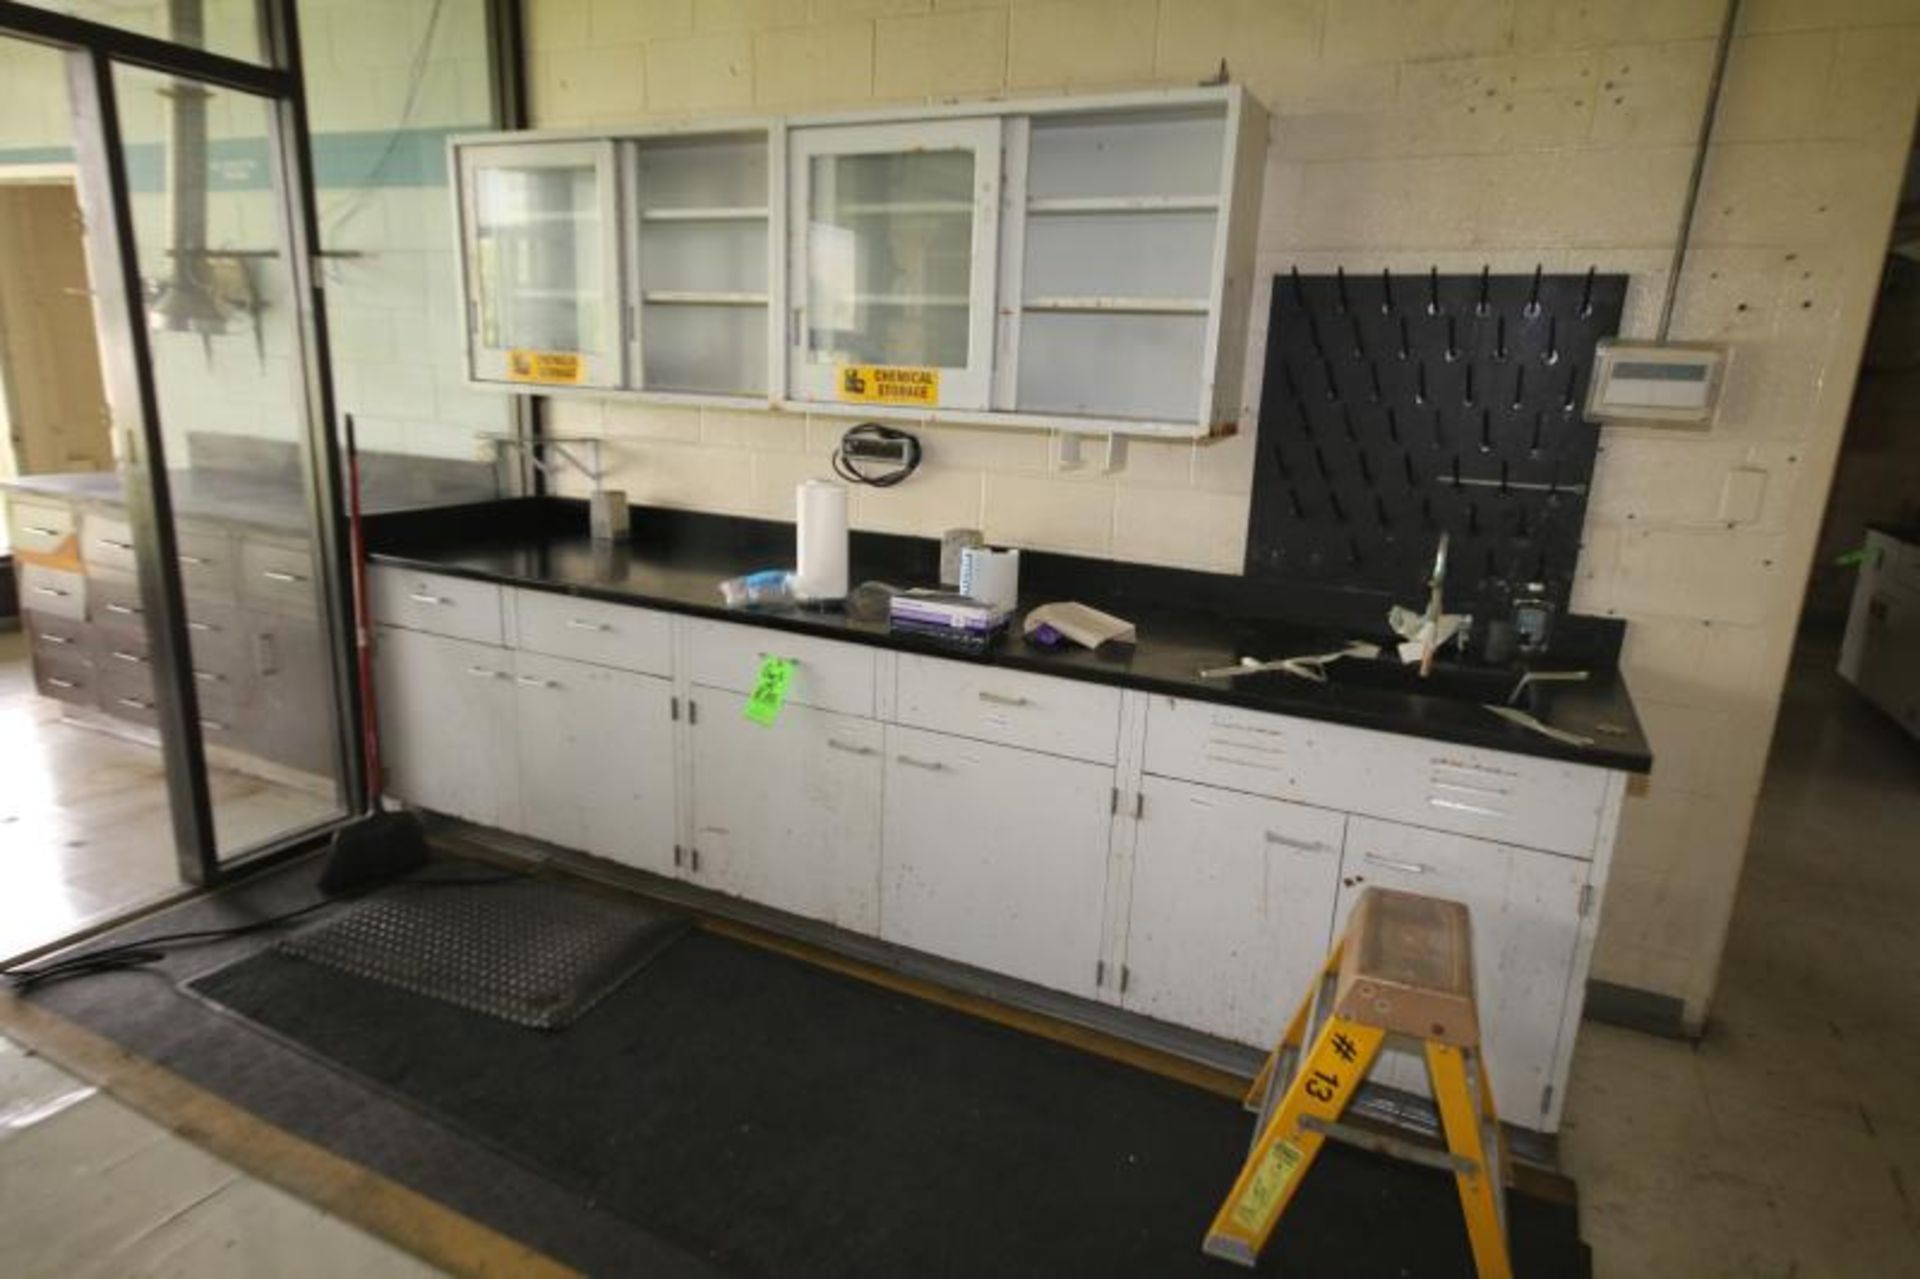 Lot of Assorted Lab Furniture in (2) Rooms, Includes (2) Lab Islands-14' L x 54" W and 160" L x - Image 5 of 6